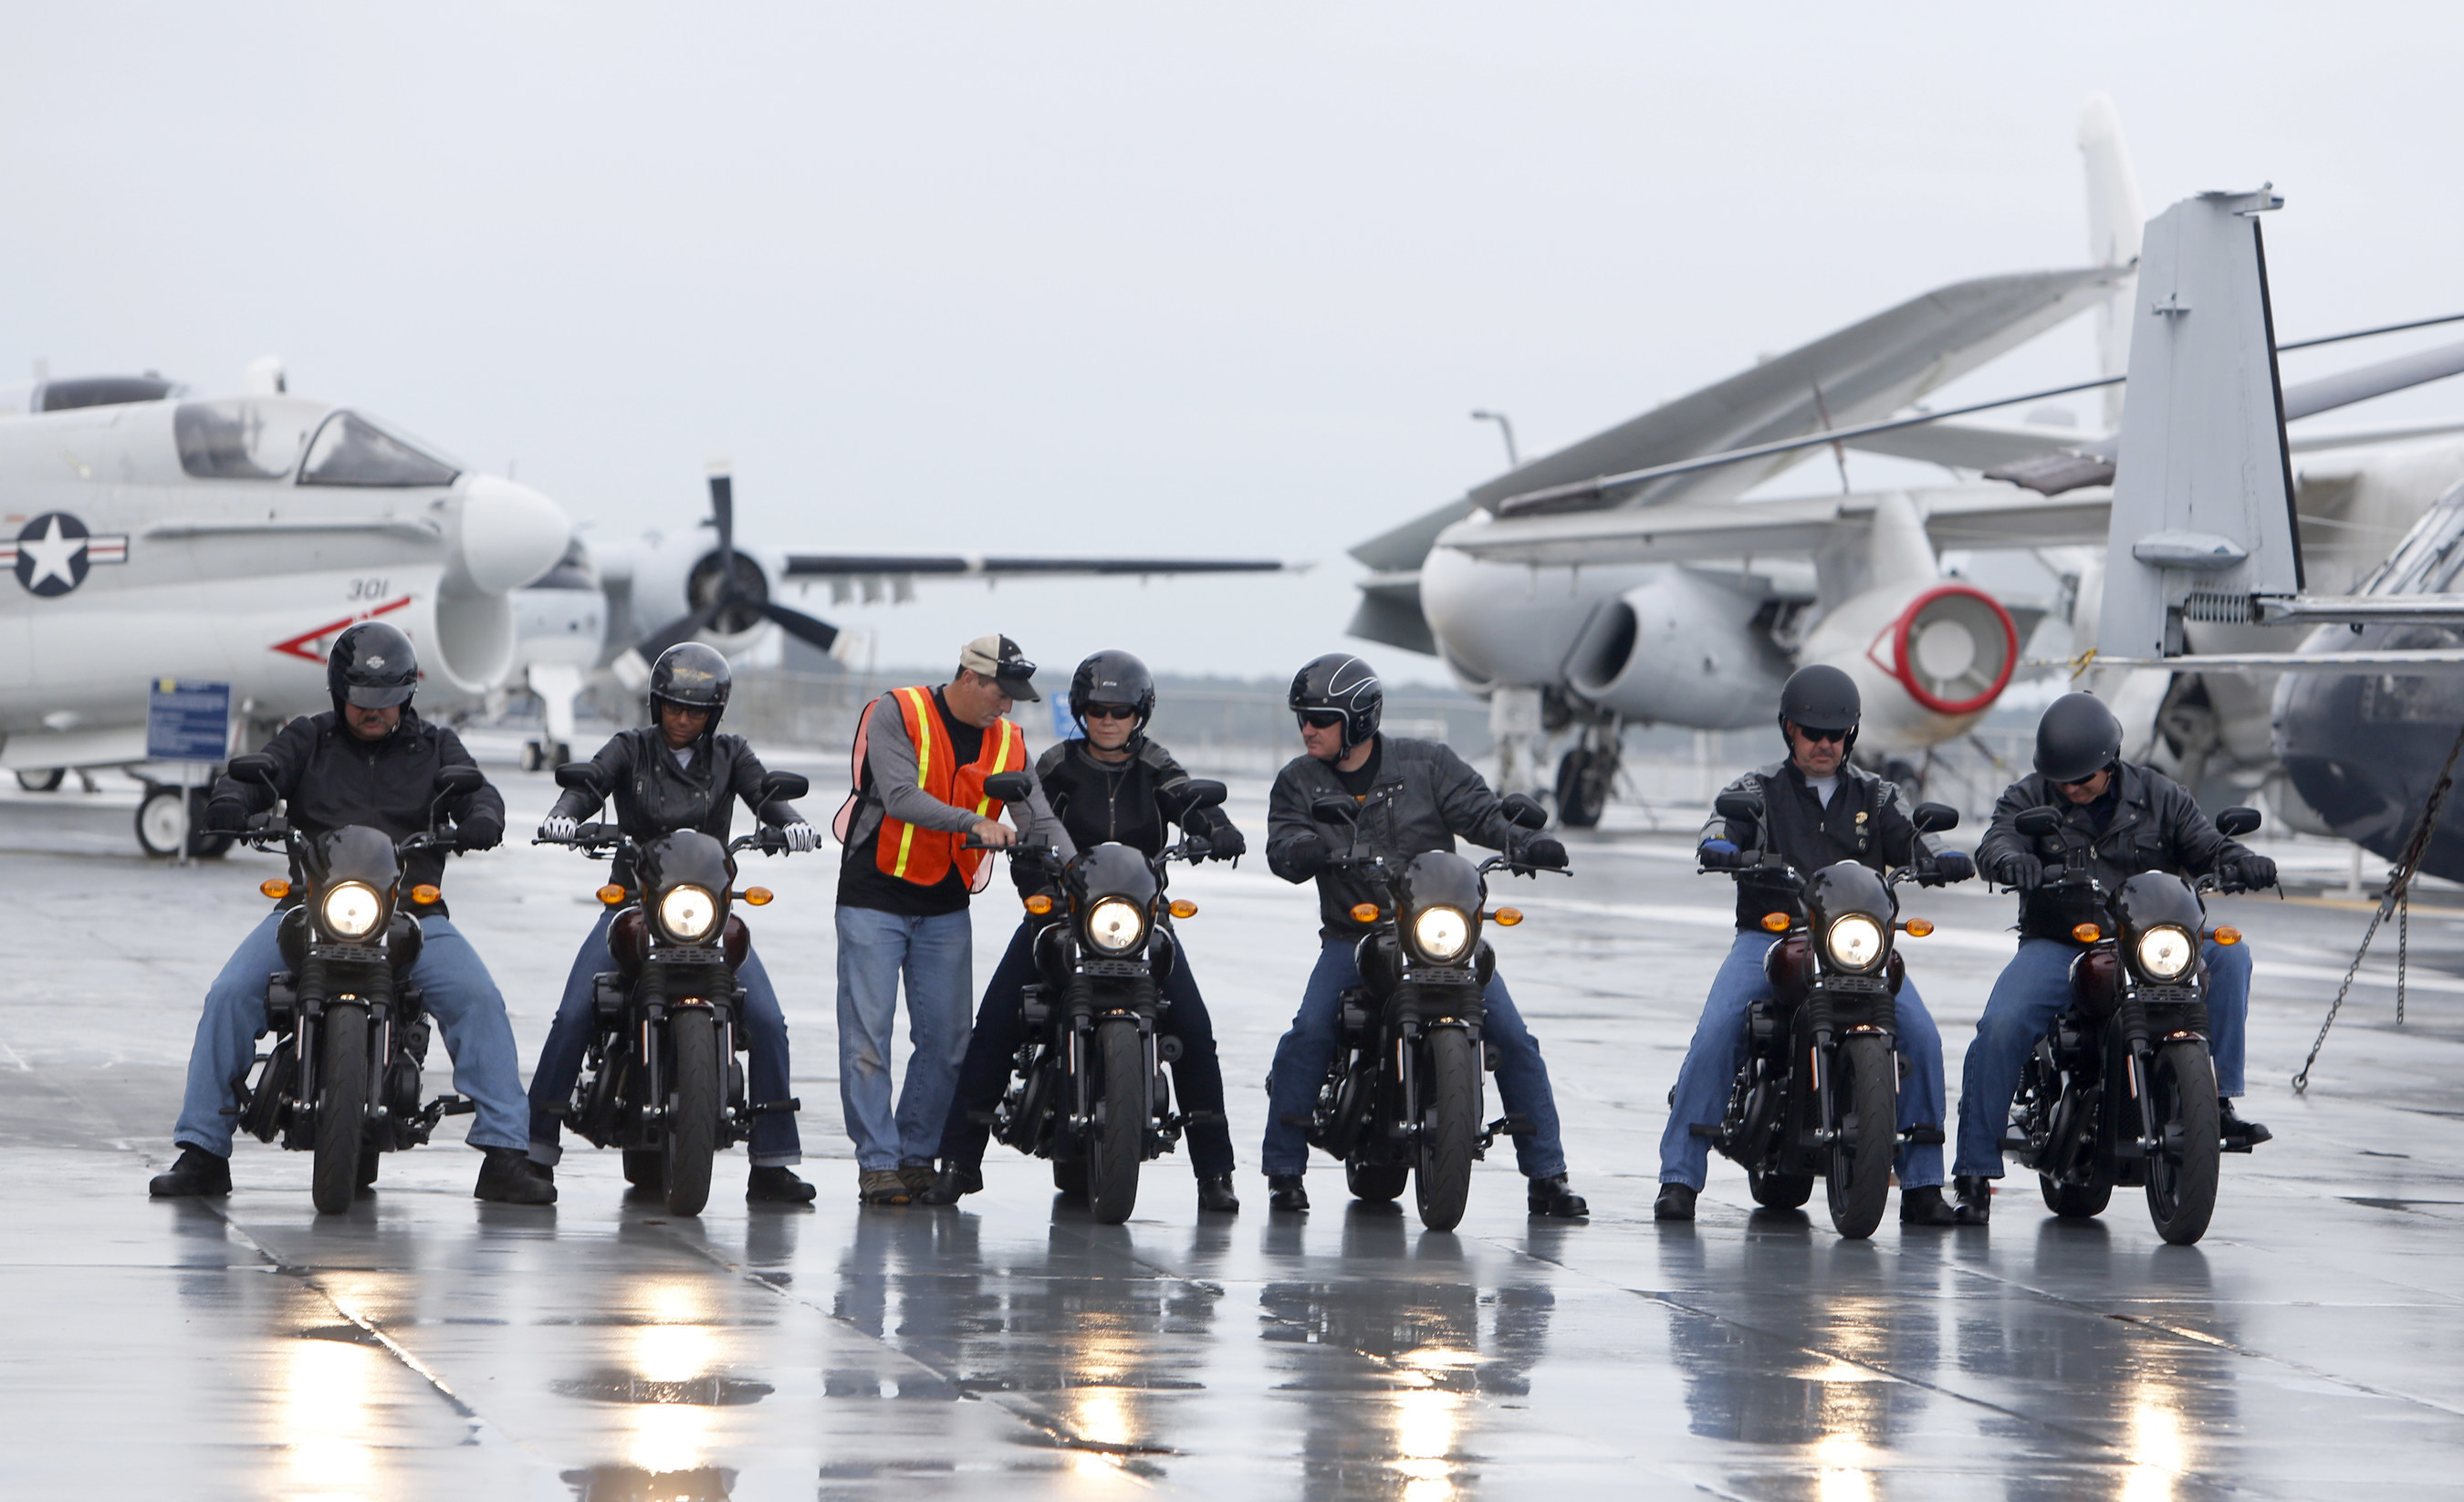 Harley-davidson Extends Offer Of Free Riding Academy Training To All Us Military Starting Jan 1